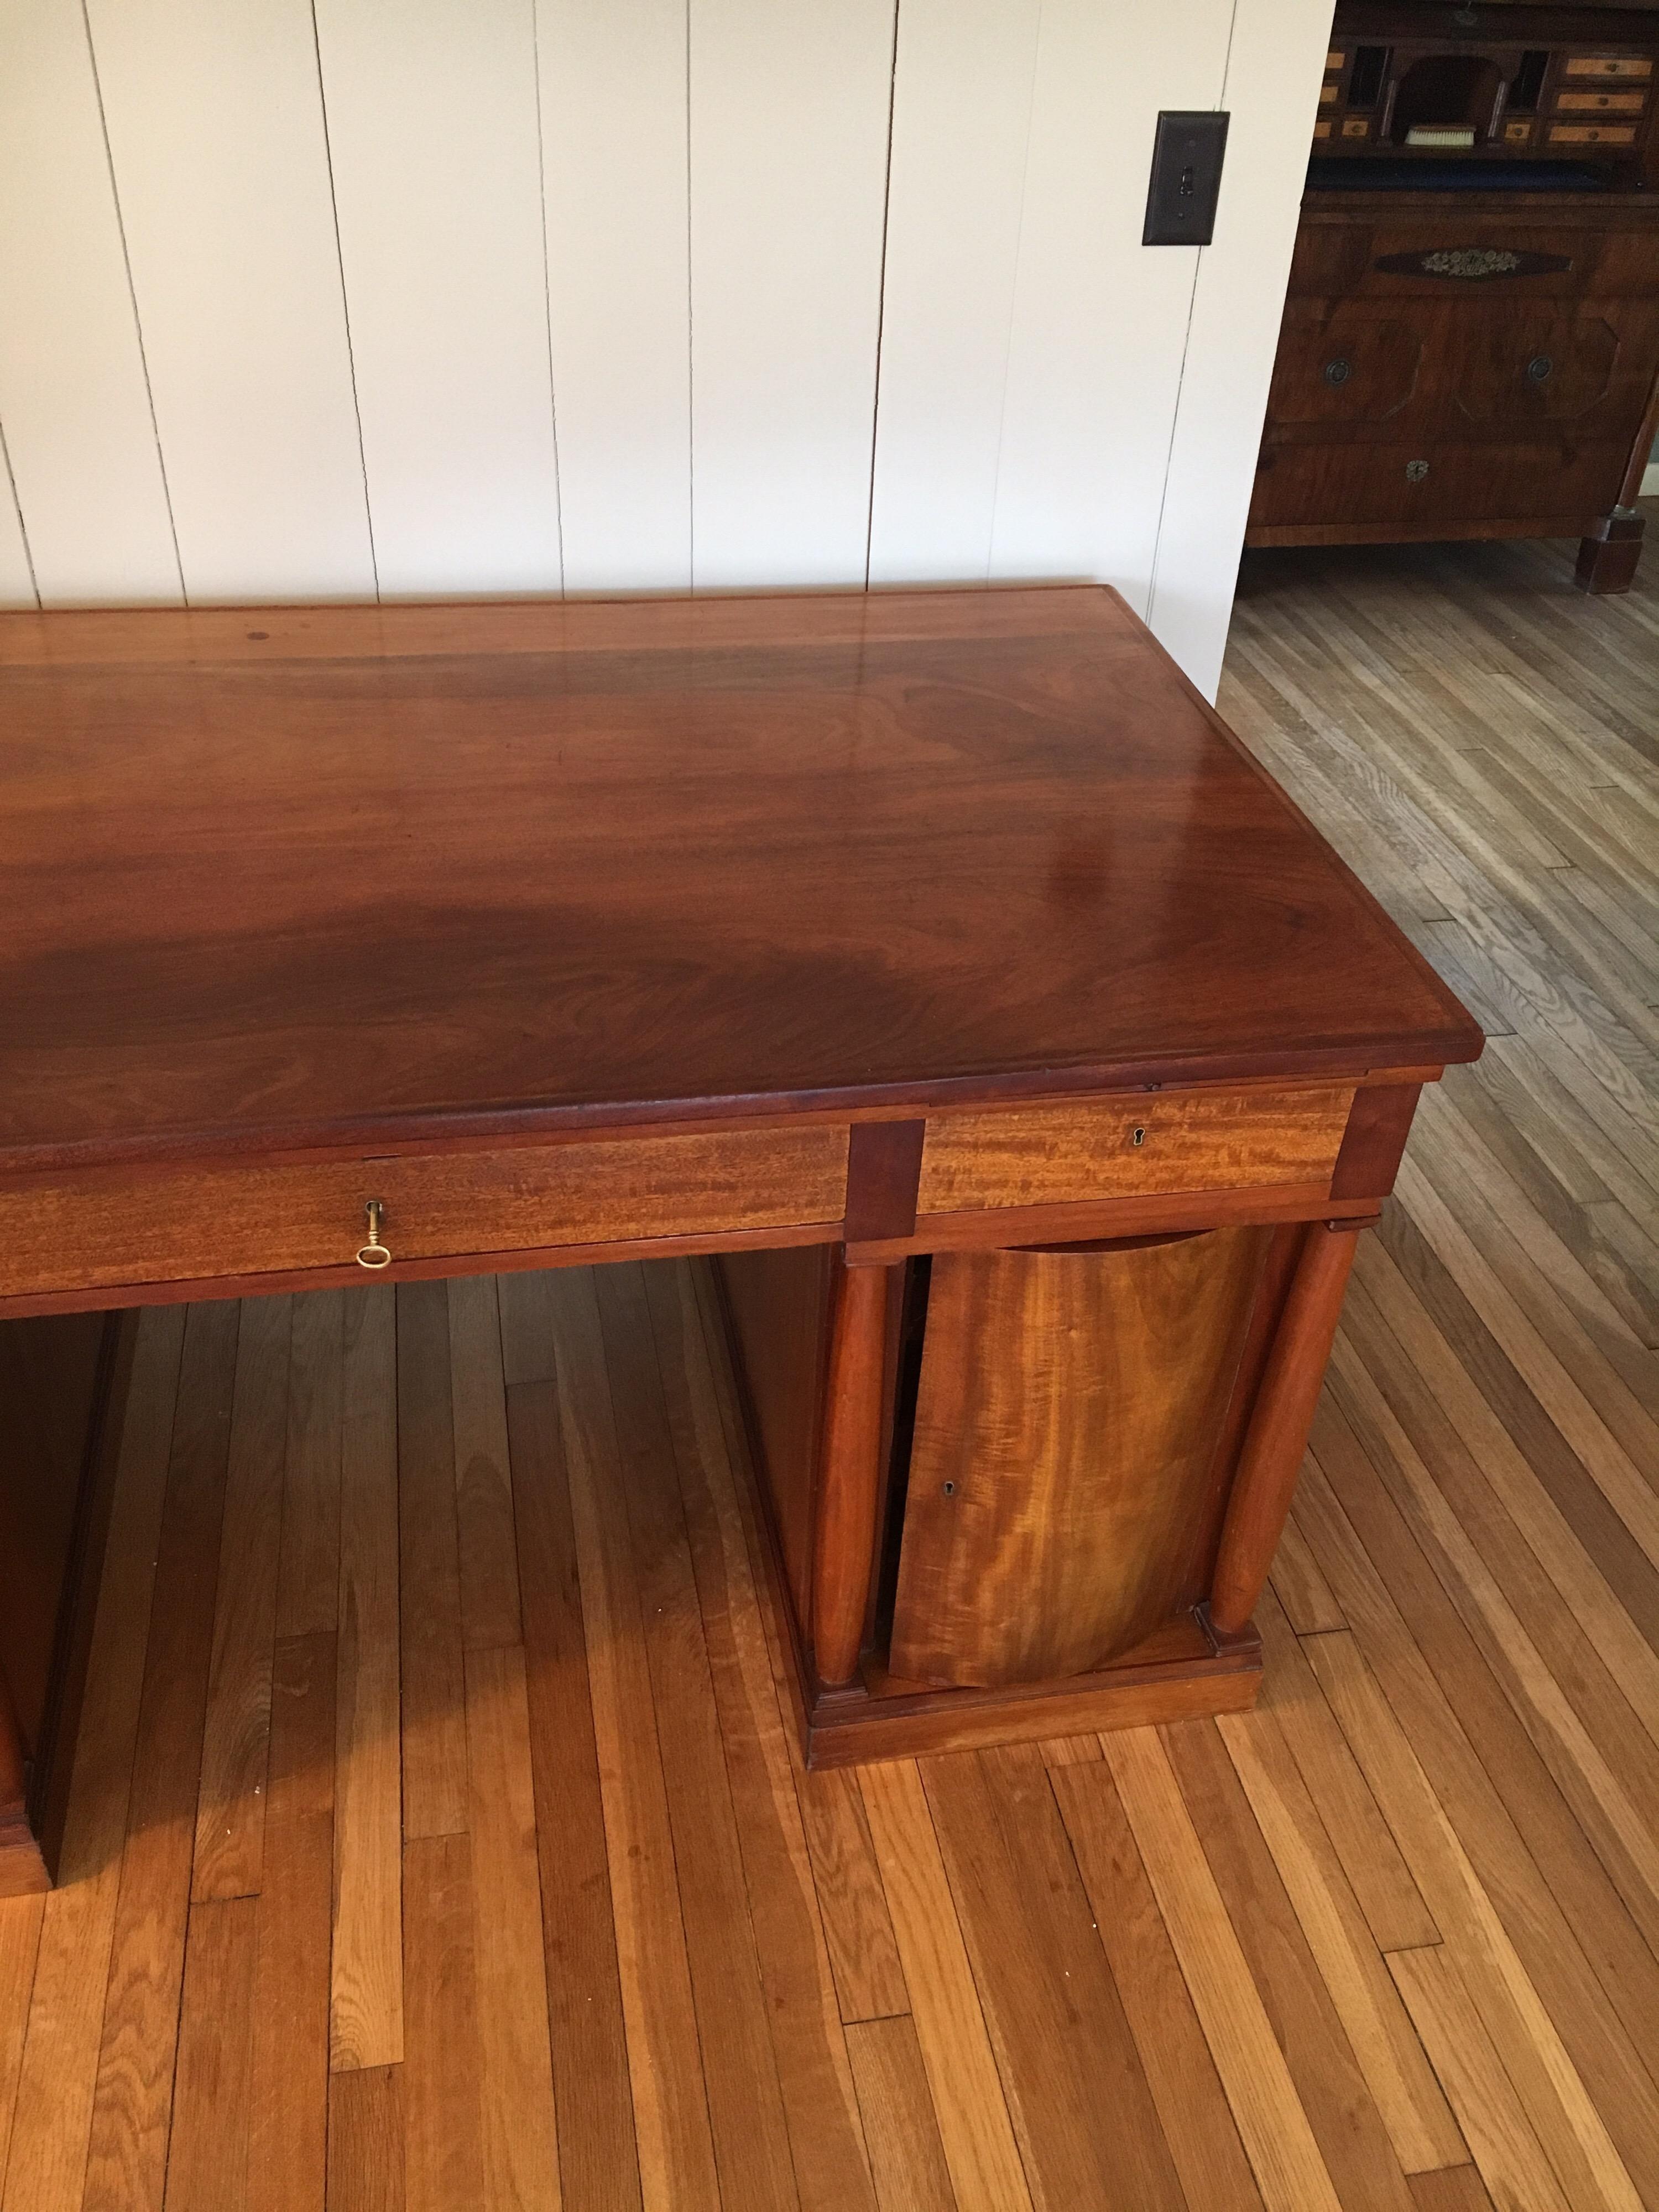 Grand and beautiful mahogany desk by Danish furniture maker Otto Meyer, made in 1918. Elegant, stately and masculine, with a glimpse of Art Deco style, as well as hearkening back to the Danish Empire style and very early touches of Danish modern,